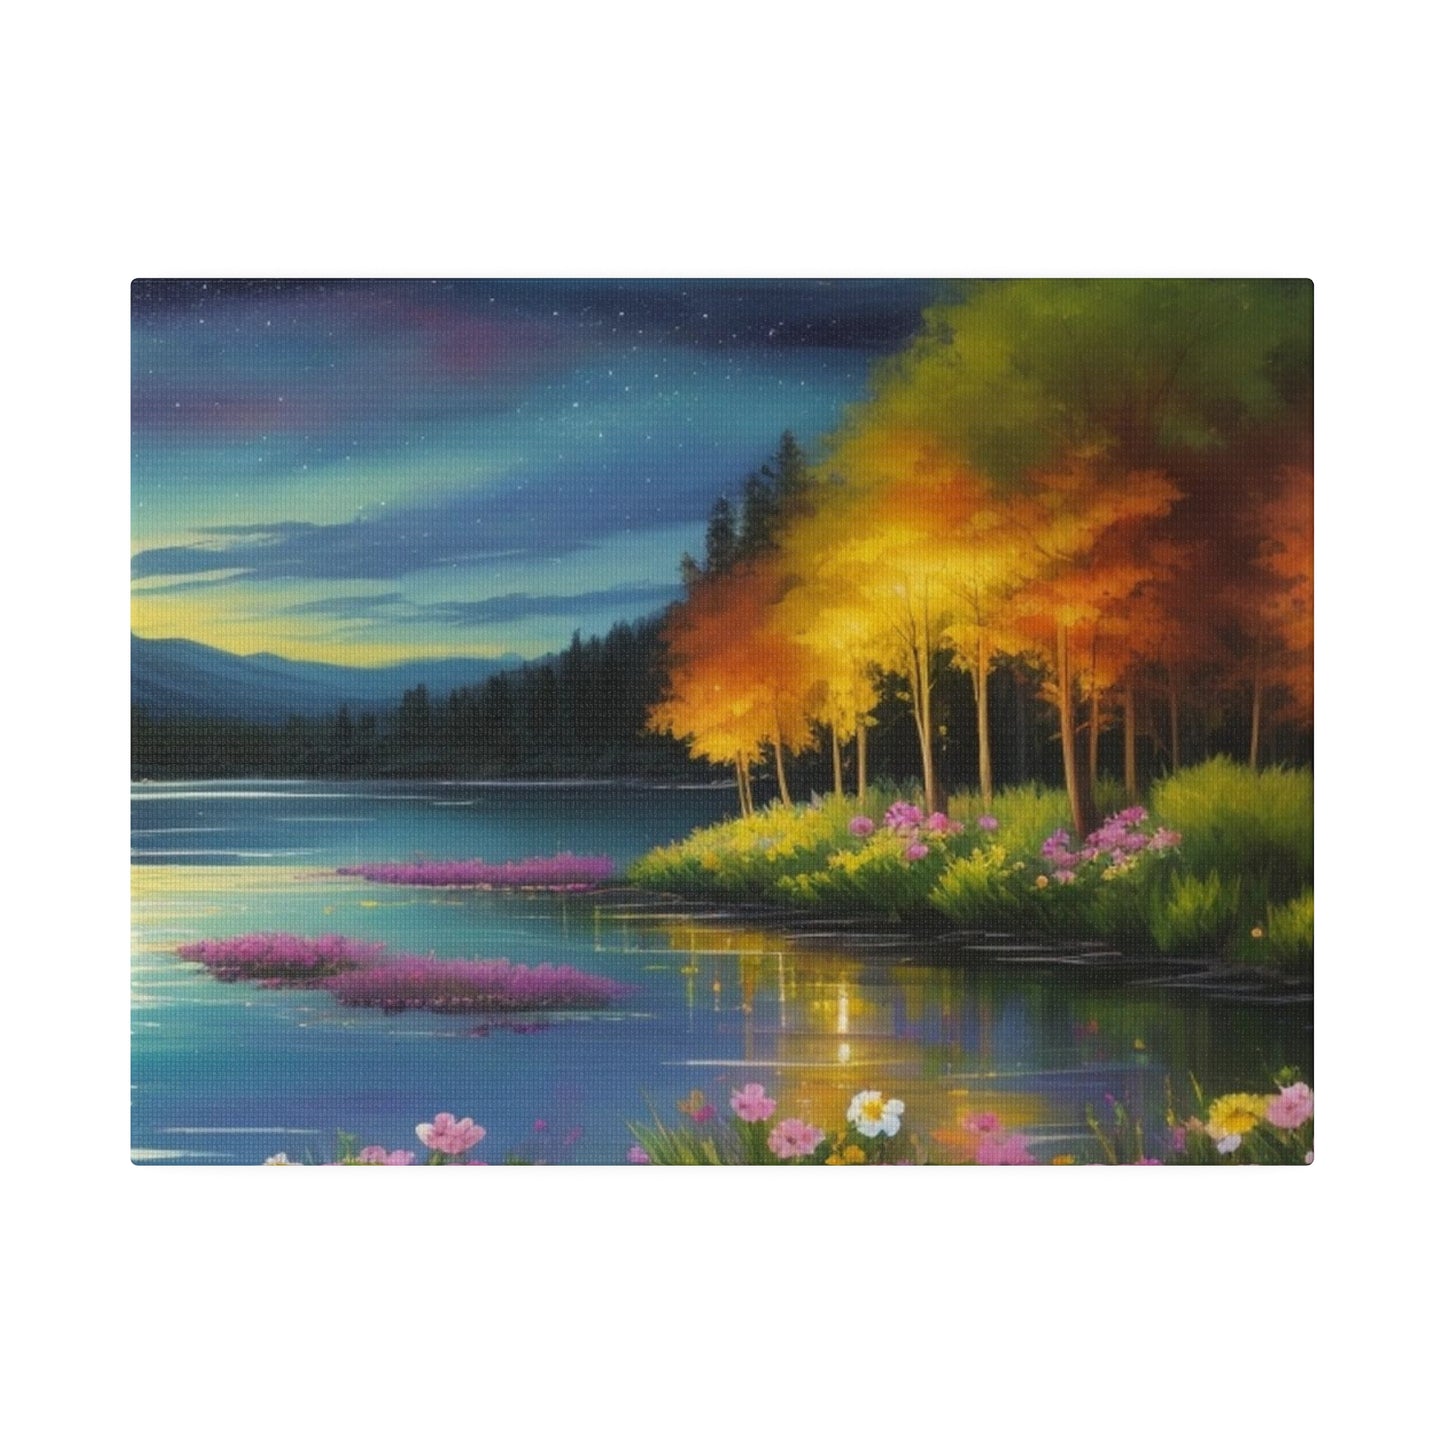 Trees And Flowers By A Lake During Sunset - Matte Canvas, Stretched, 0.75"